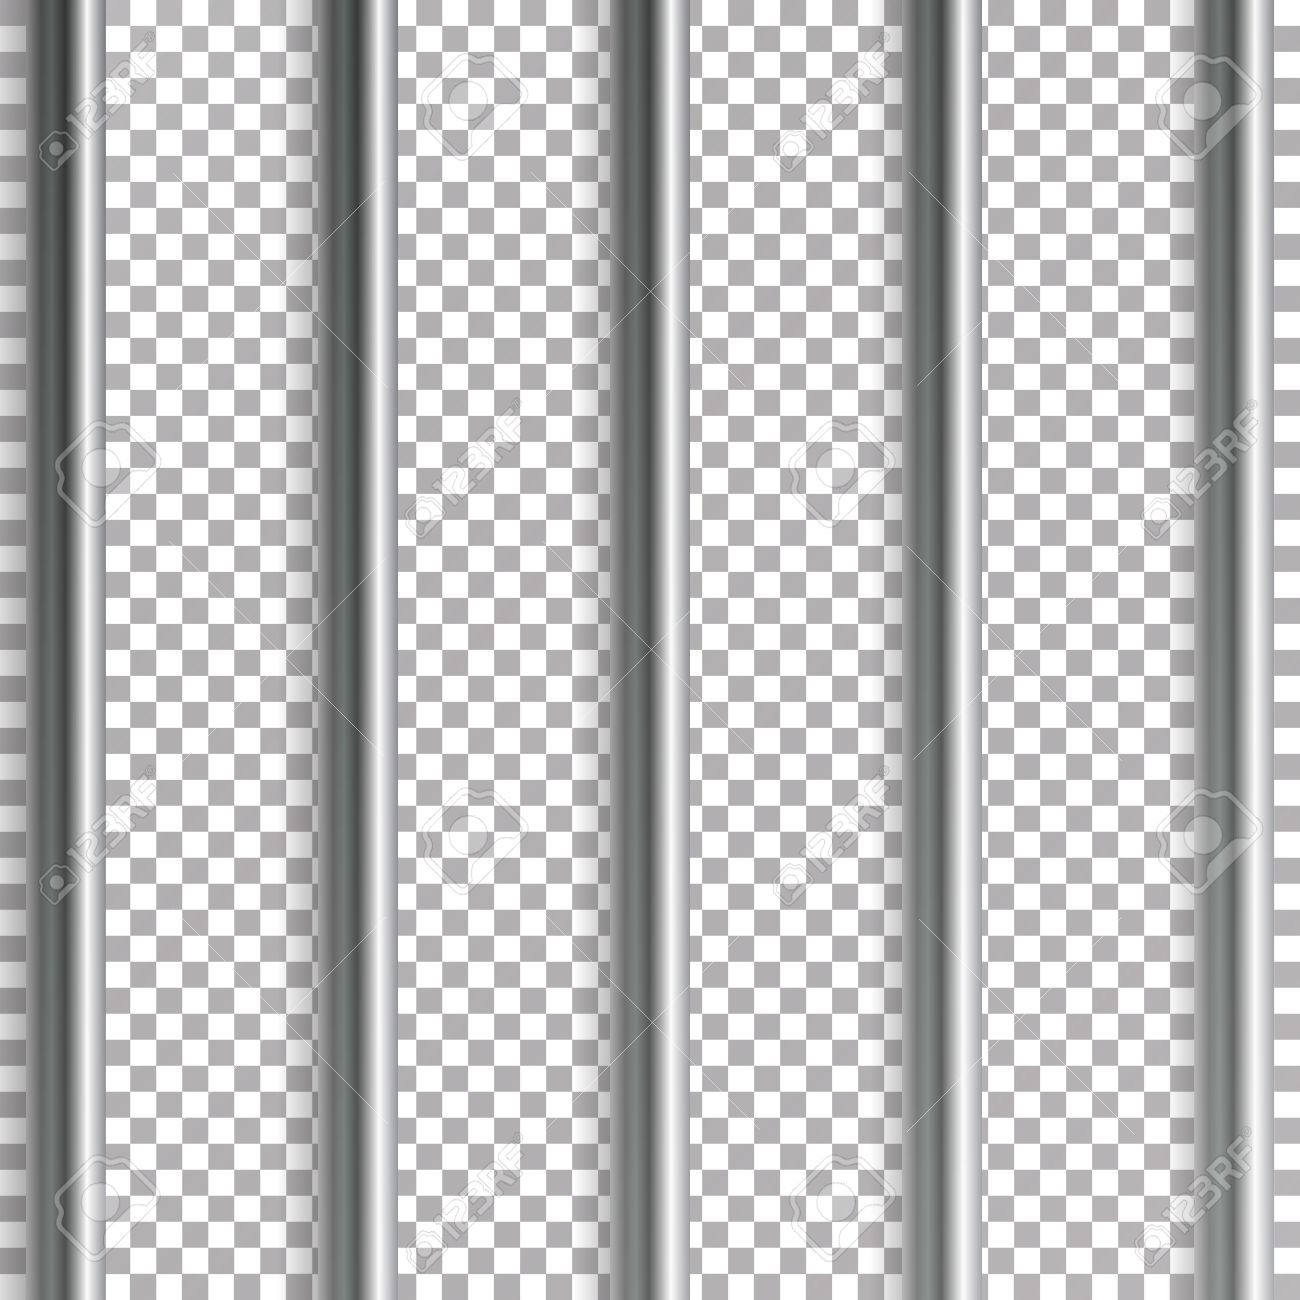 Jail Bars Vector Illustration Isolated On Transparent Background